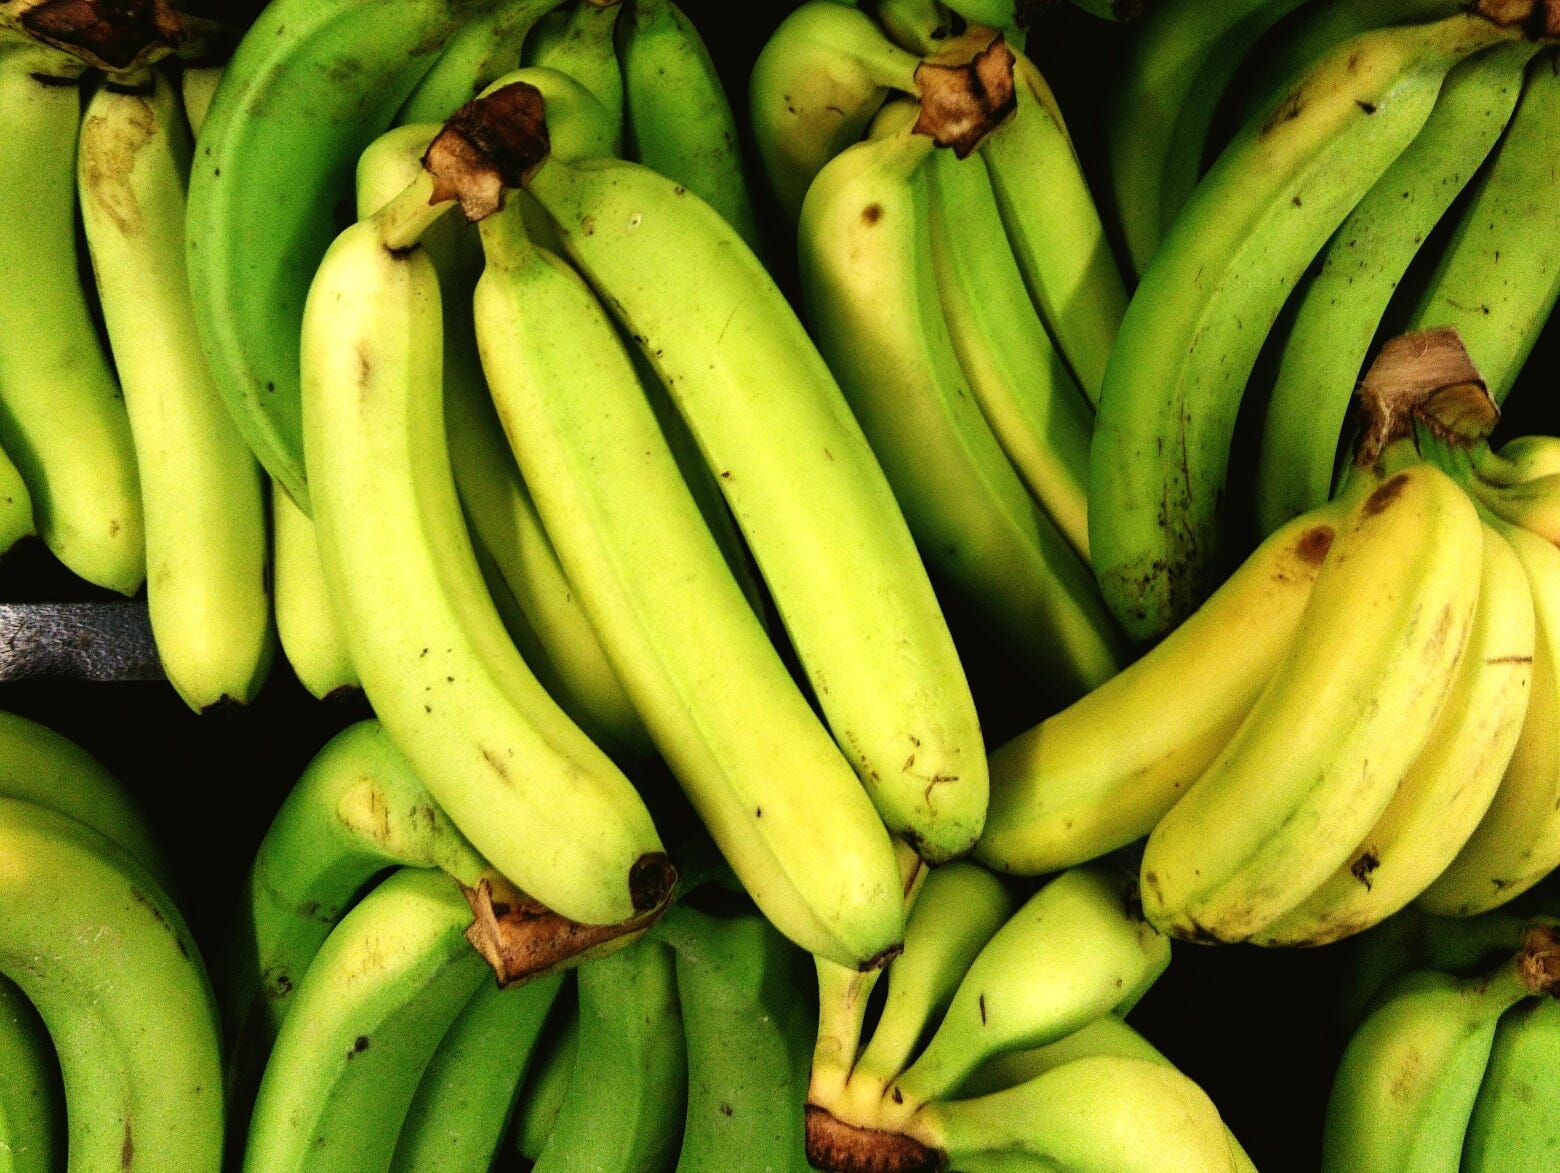 Overhead shot of bunches of green bananas